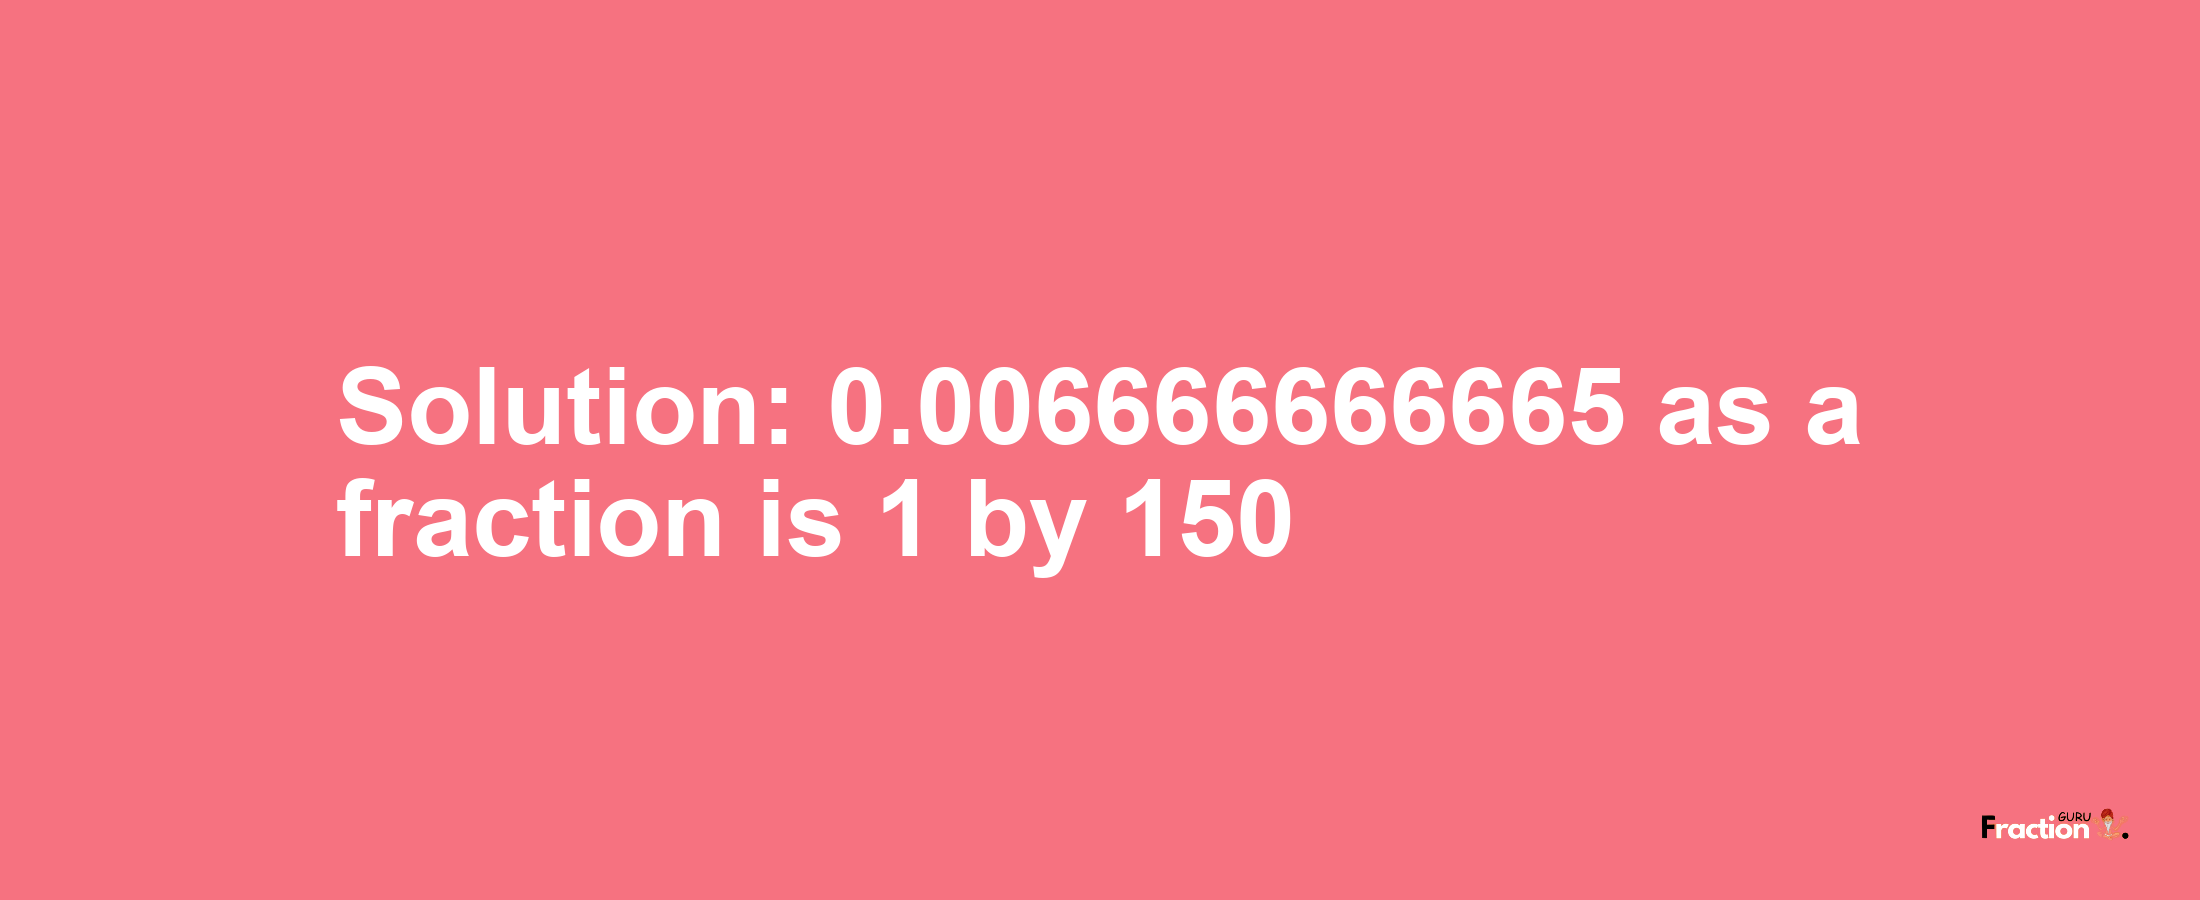 Solution:0.006666666665 as a fraction is 1/150